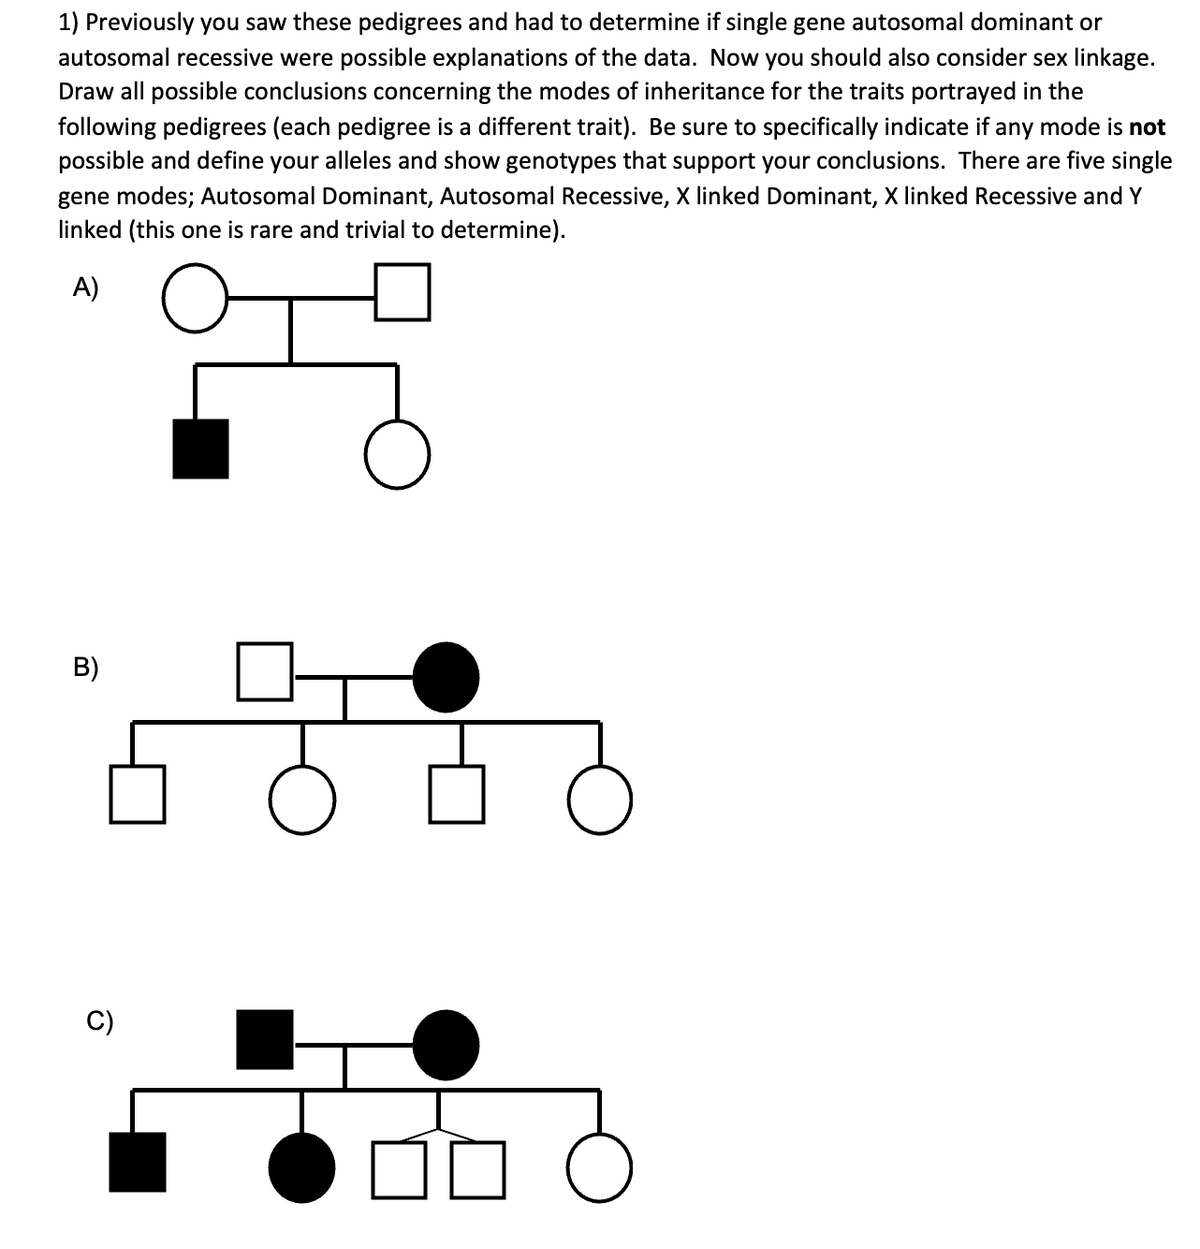 1) Previously you saw these pedigrees and had to determine if single gene autosomal dominant or
autosomal recessive were possible explanations of the data. Now you should also consider sex linkage.
Draw all possible conclusions concerning the modes of inheritance for the traits portrayed in the
following pedigrees (each pedigree is a different trait). Be sure to specifically indicate if any mode is not
possible and define your alleles and show genotypes that support your conclusions. There are five single
gene modes; Autosomal Dominant, Autosomal Recessive, X linked Dominant, X linked Recessive and Y
linked (this one is rare and trivial to determine).
A)
F
B)